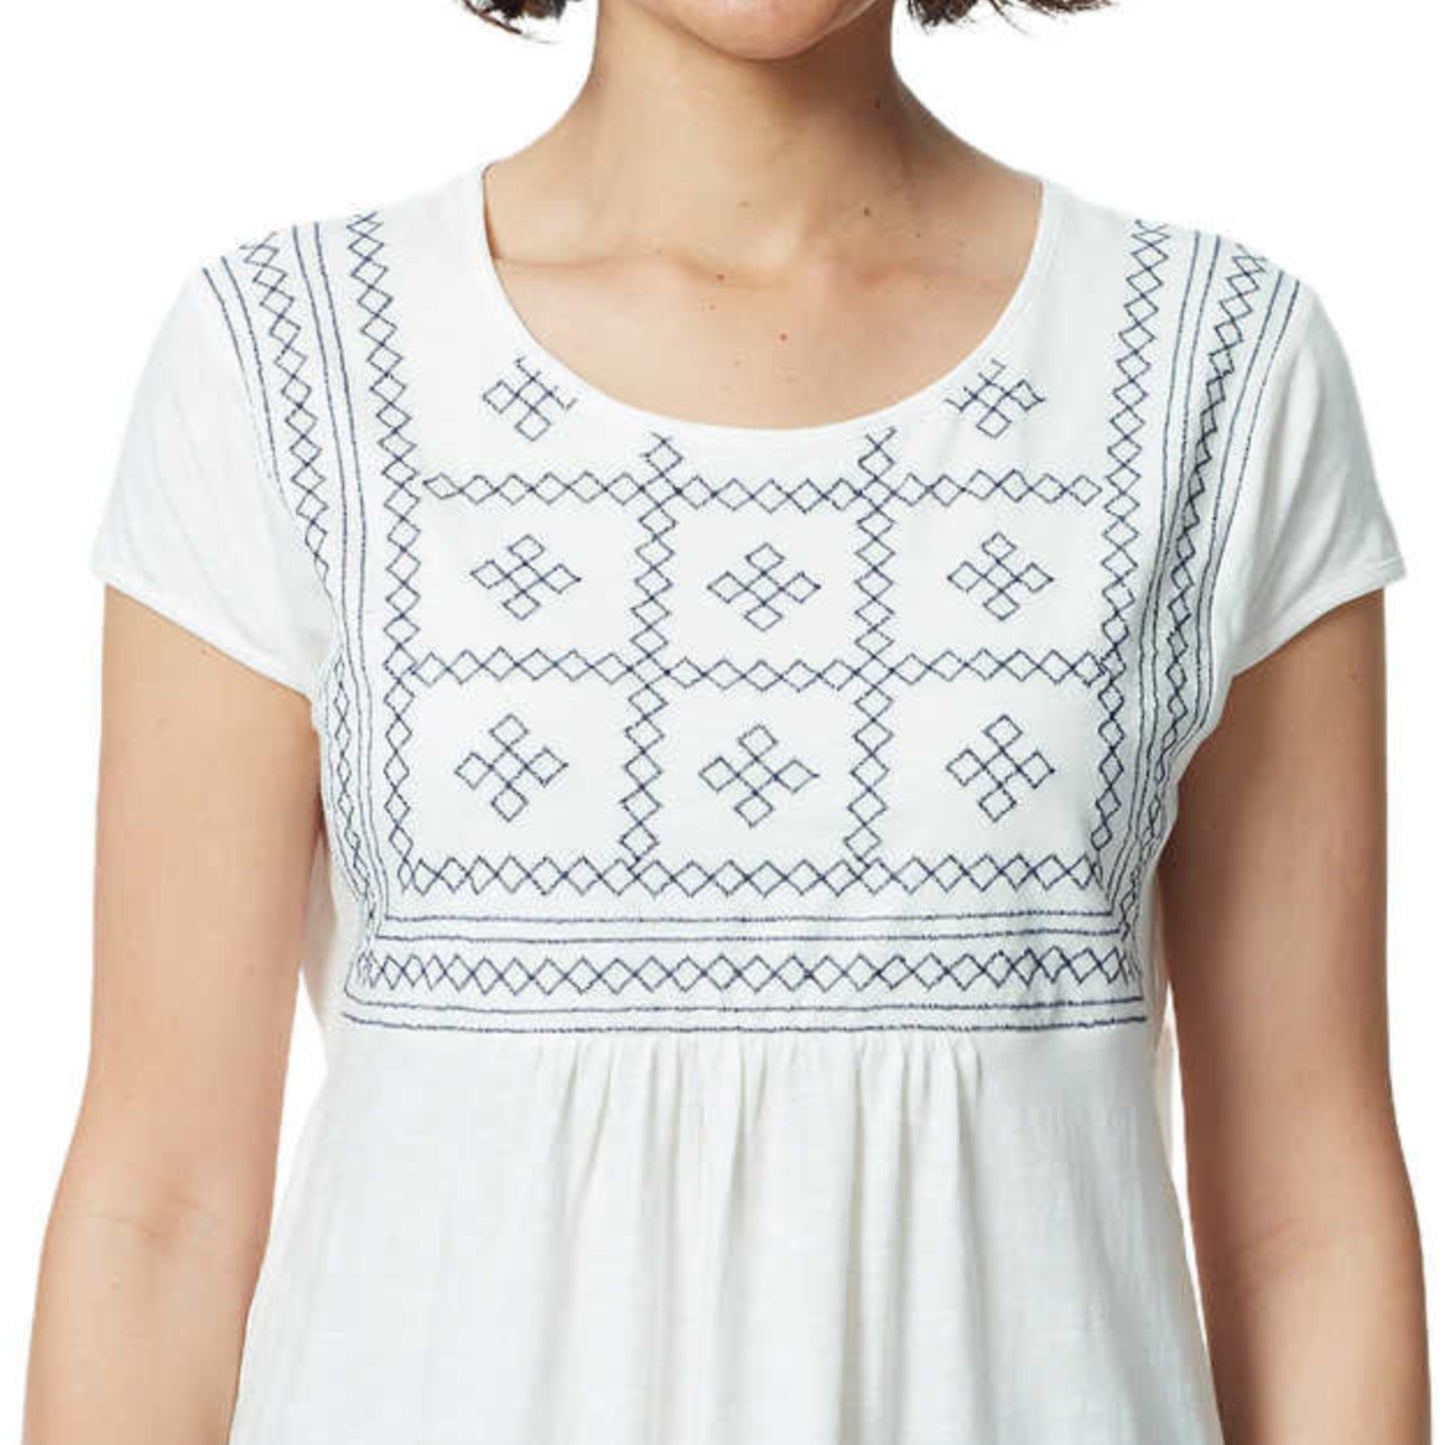 Gloria Vanderbilt Women's Plus Embroidered Relaxed Fit Tee Tunic Top